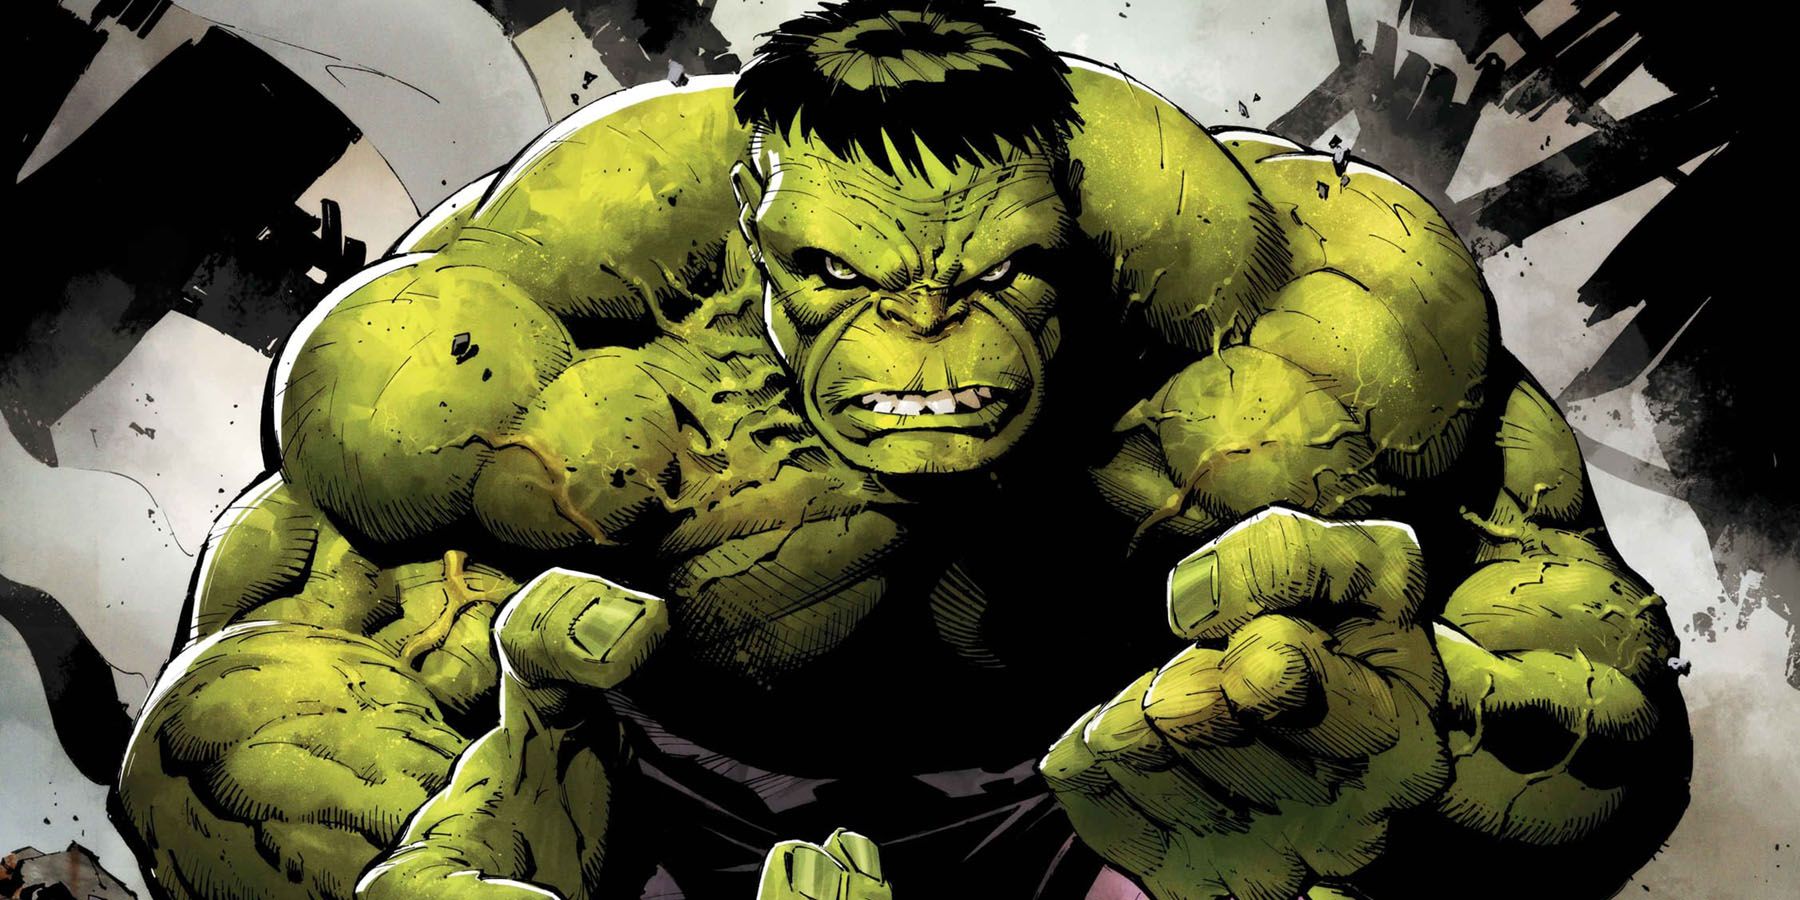 The Hulk punches his way through a wall in Marvel Comics